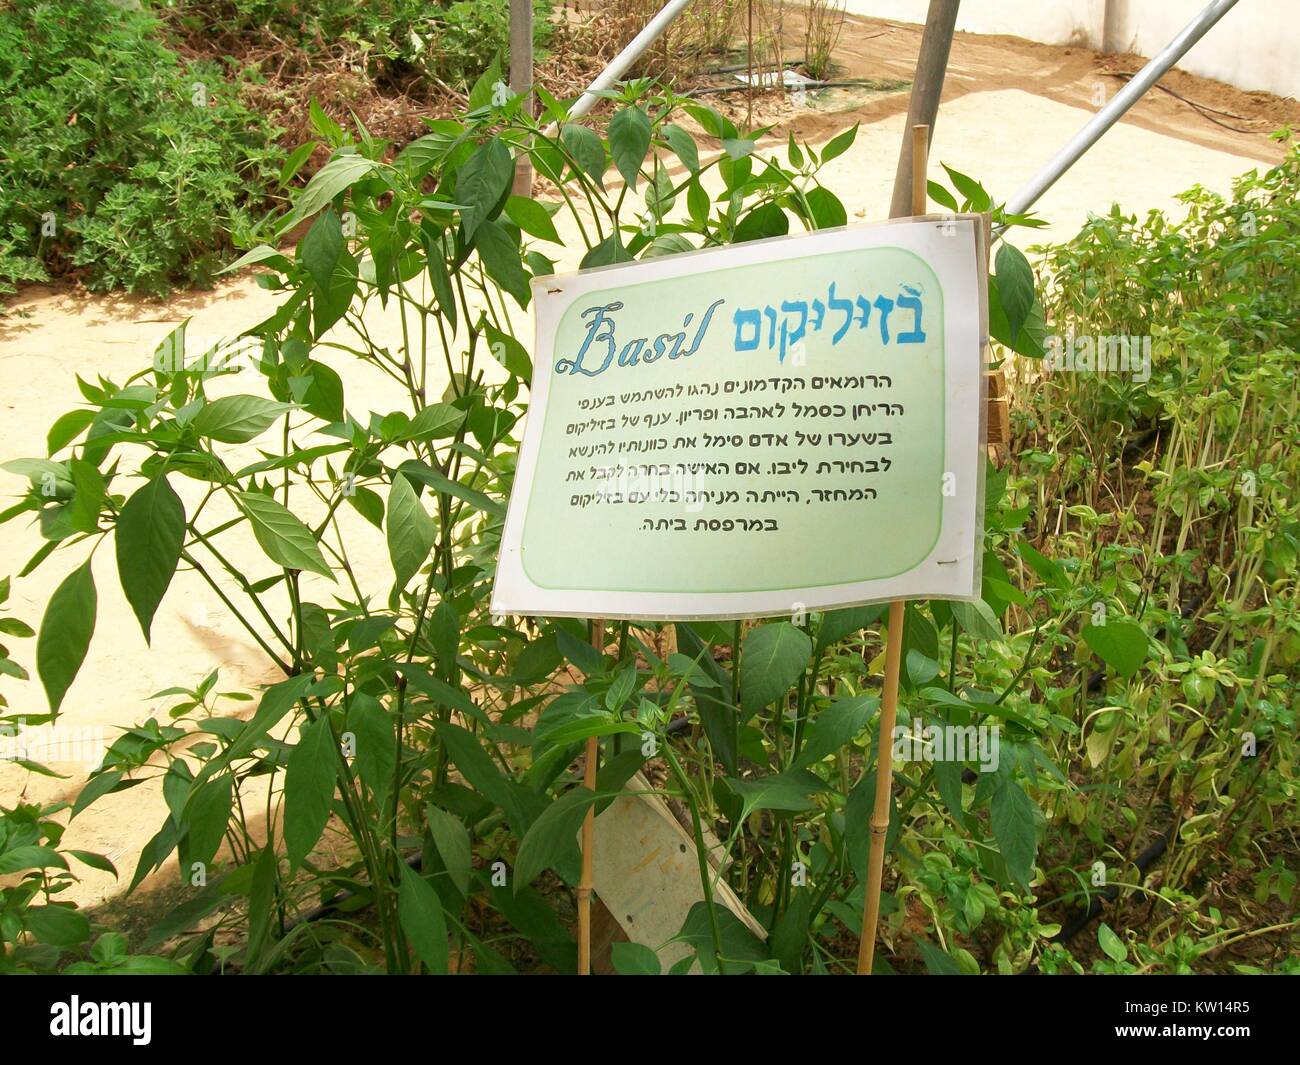 Basil grown hydroponically, using partially recycled water, at Shvil Hasalat experimental farm in the Negev Desert, Israel, 2012. Stock Photo